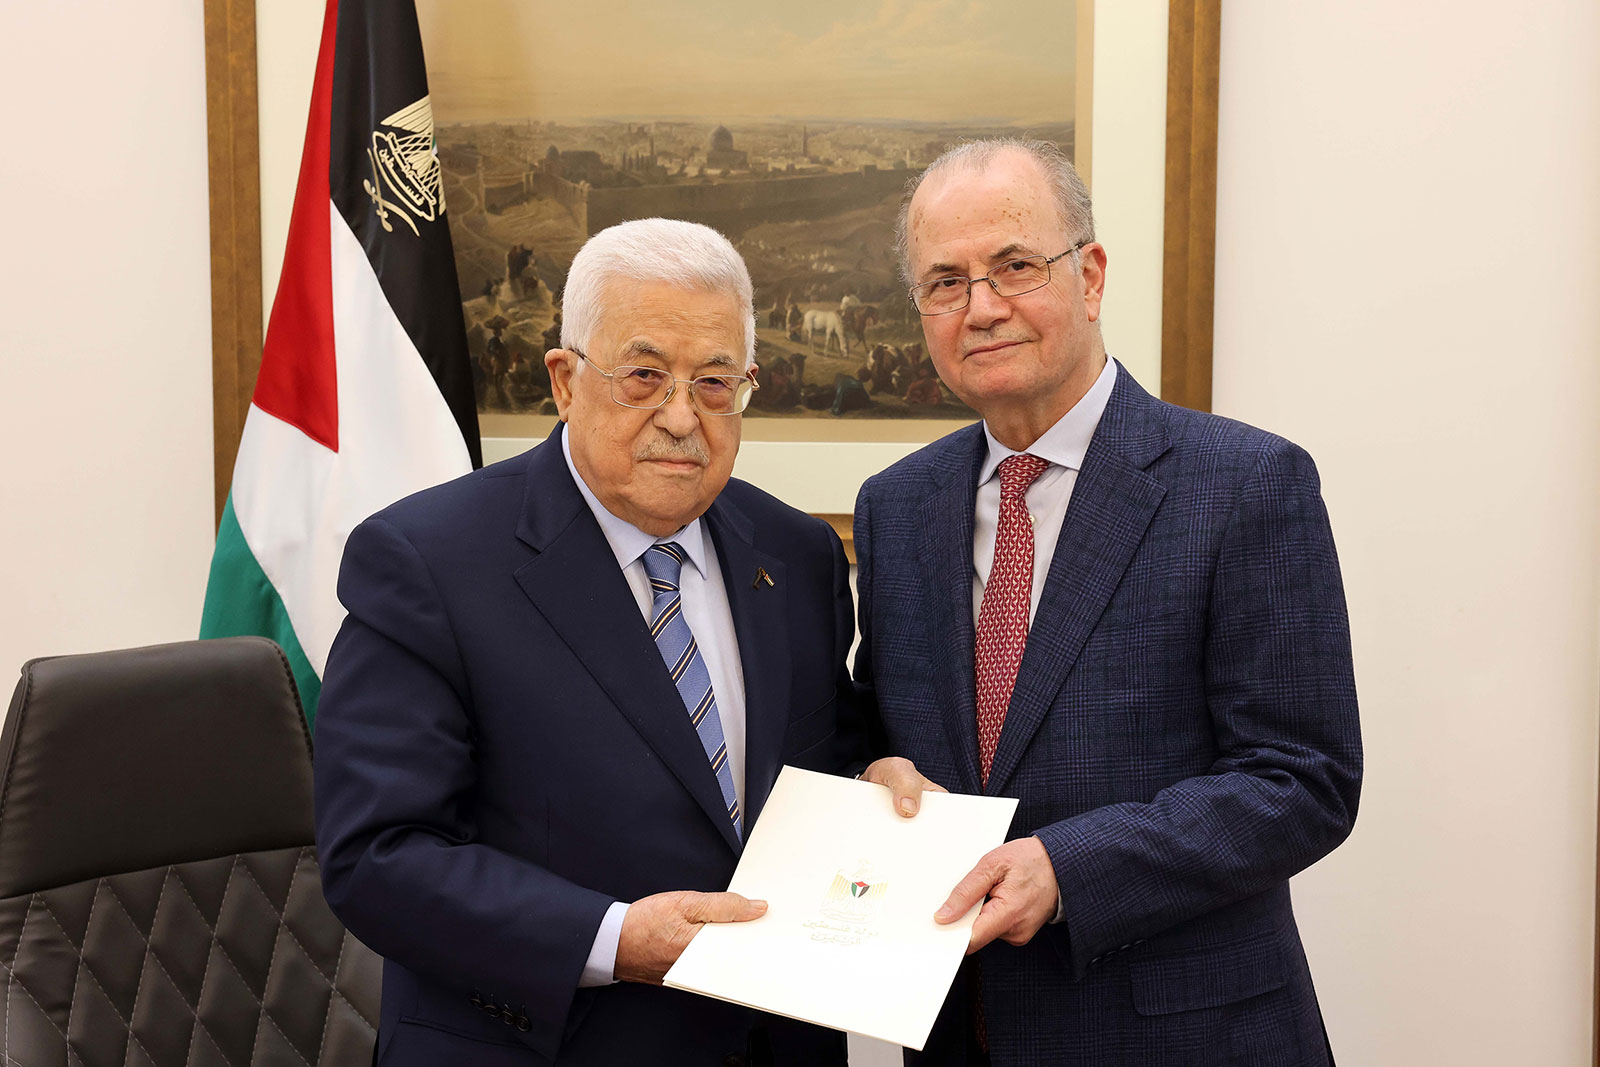 Palestinian President Mahmoud Abbas, left, poses with Mohammed Mustafa after appointeing him as the new Prime Minister in Ramallah, on Thursday, March 14. (